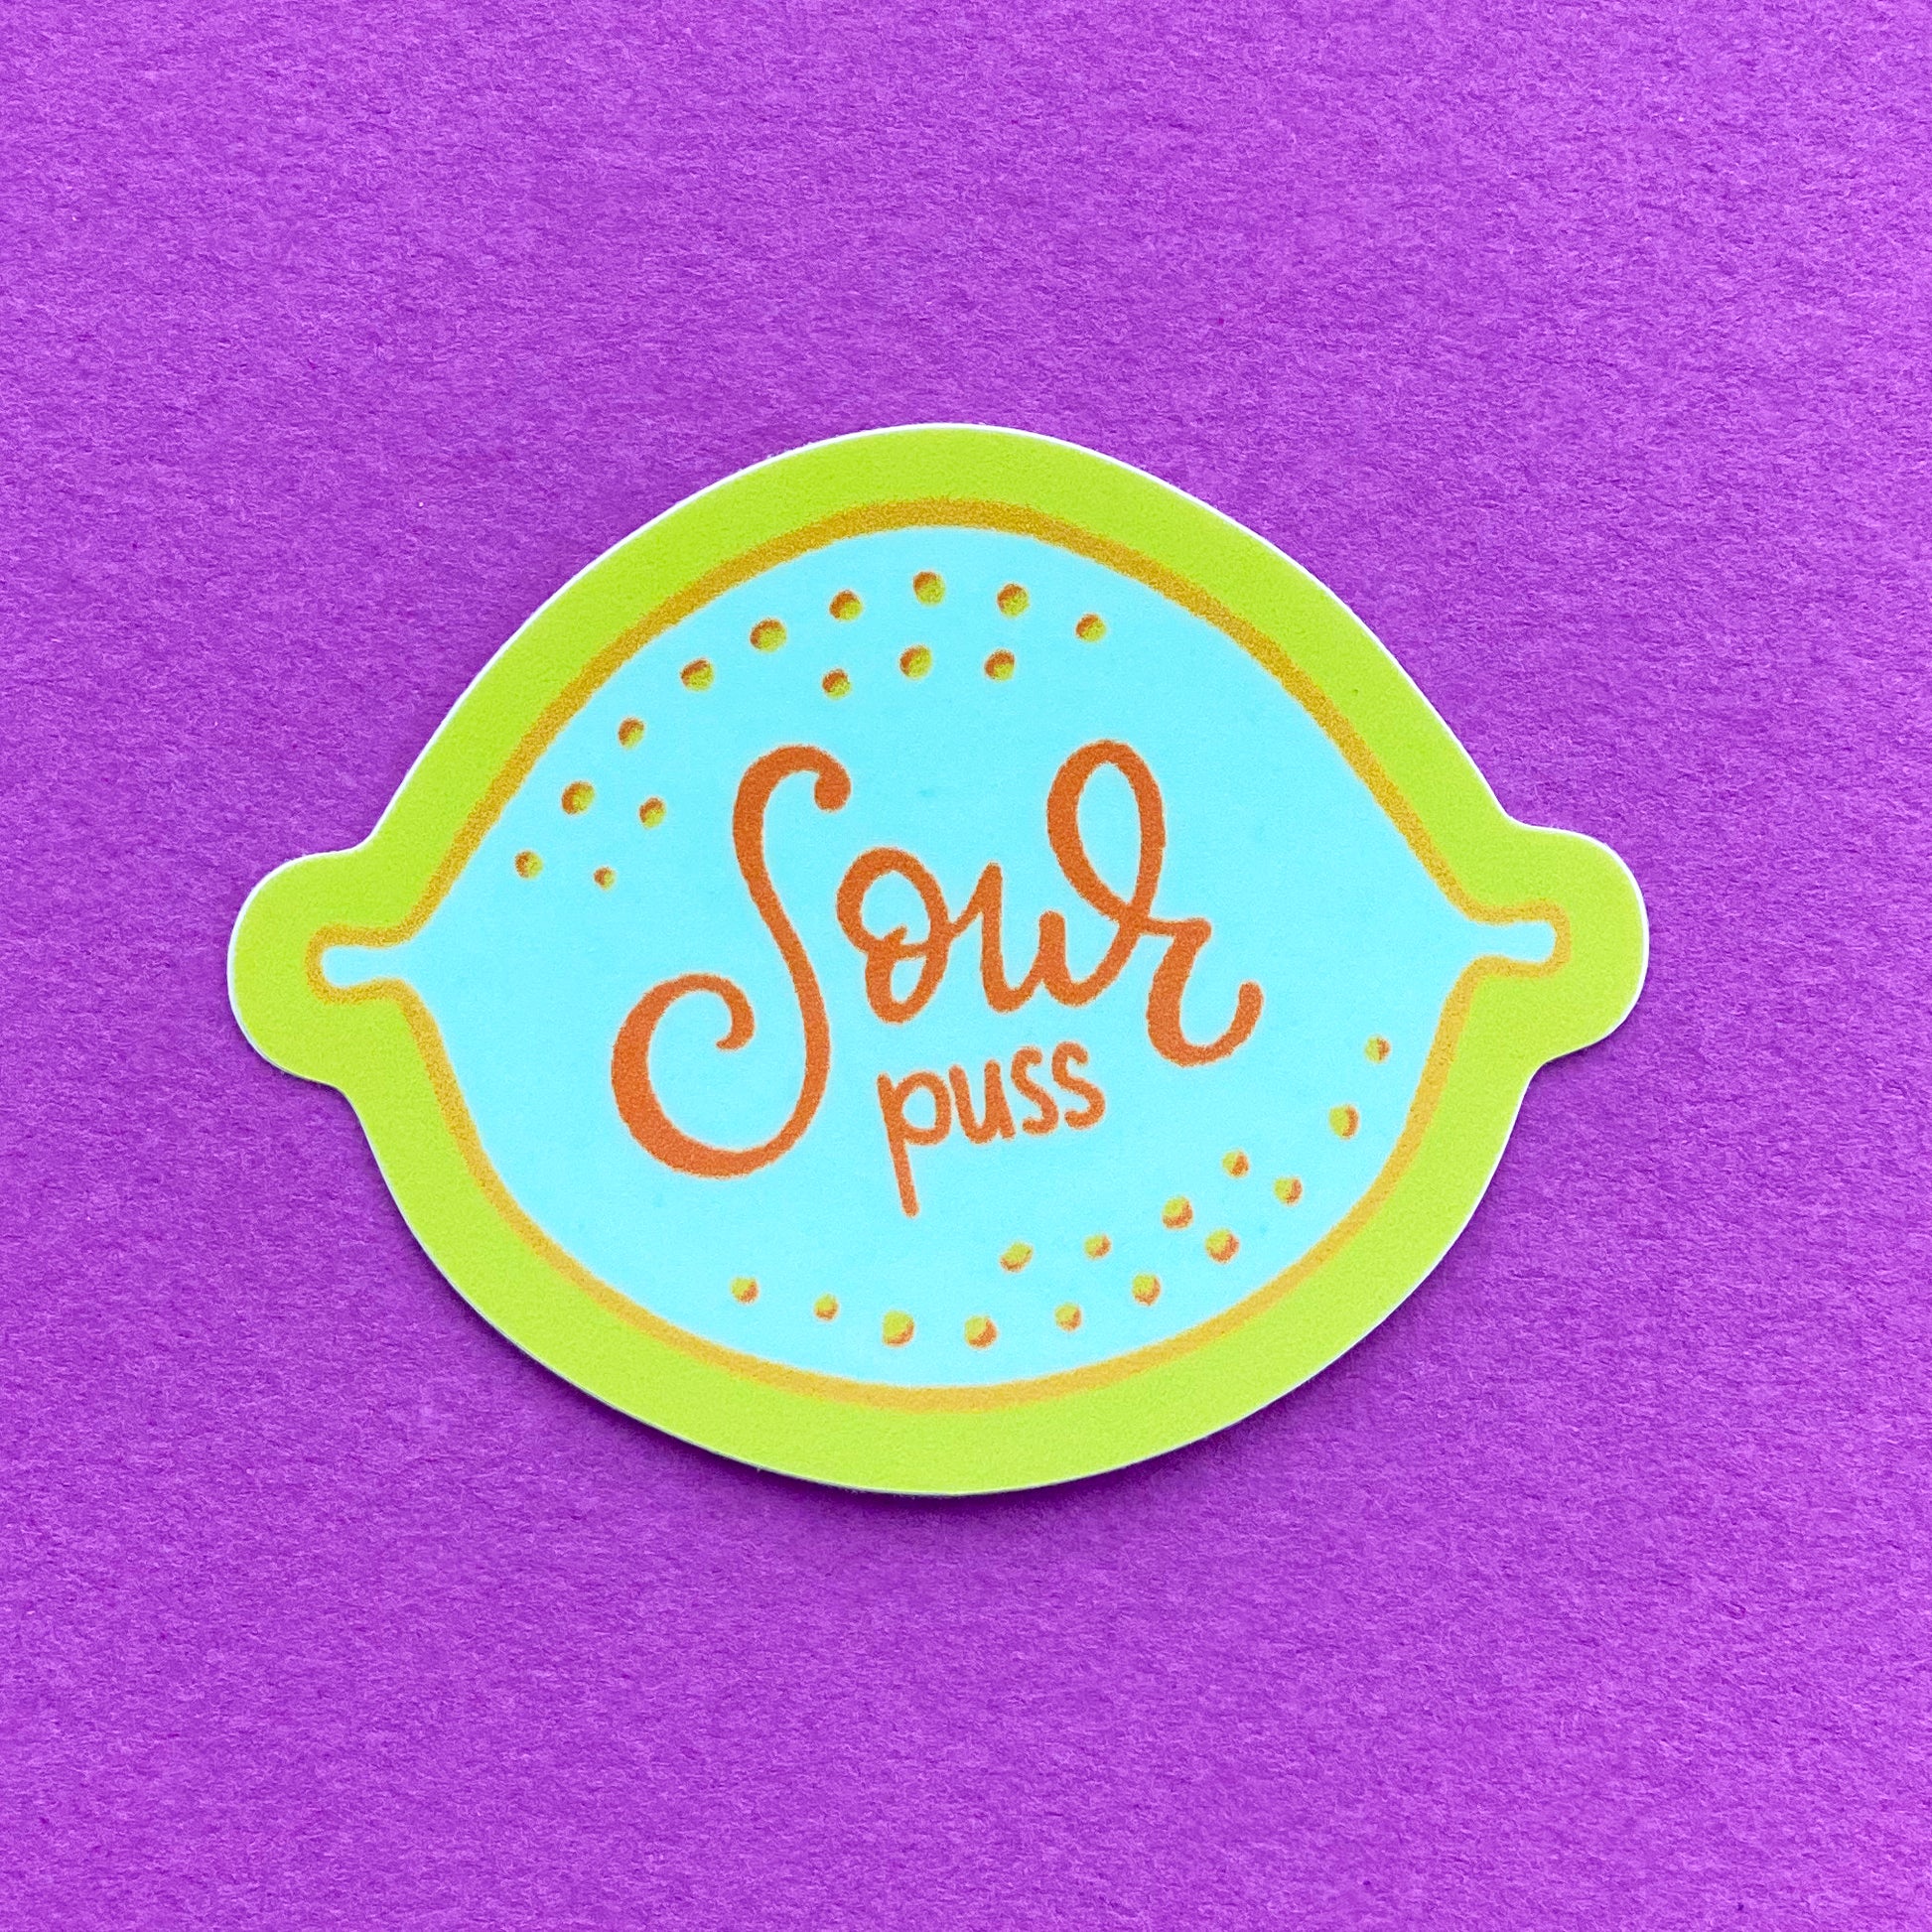 A vinyl sticker with an illustration of a blue lemon and the words "Sour puss" written on it. The sticker has a yellow border and sits on a birght purple paper background.